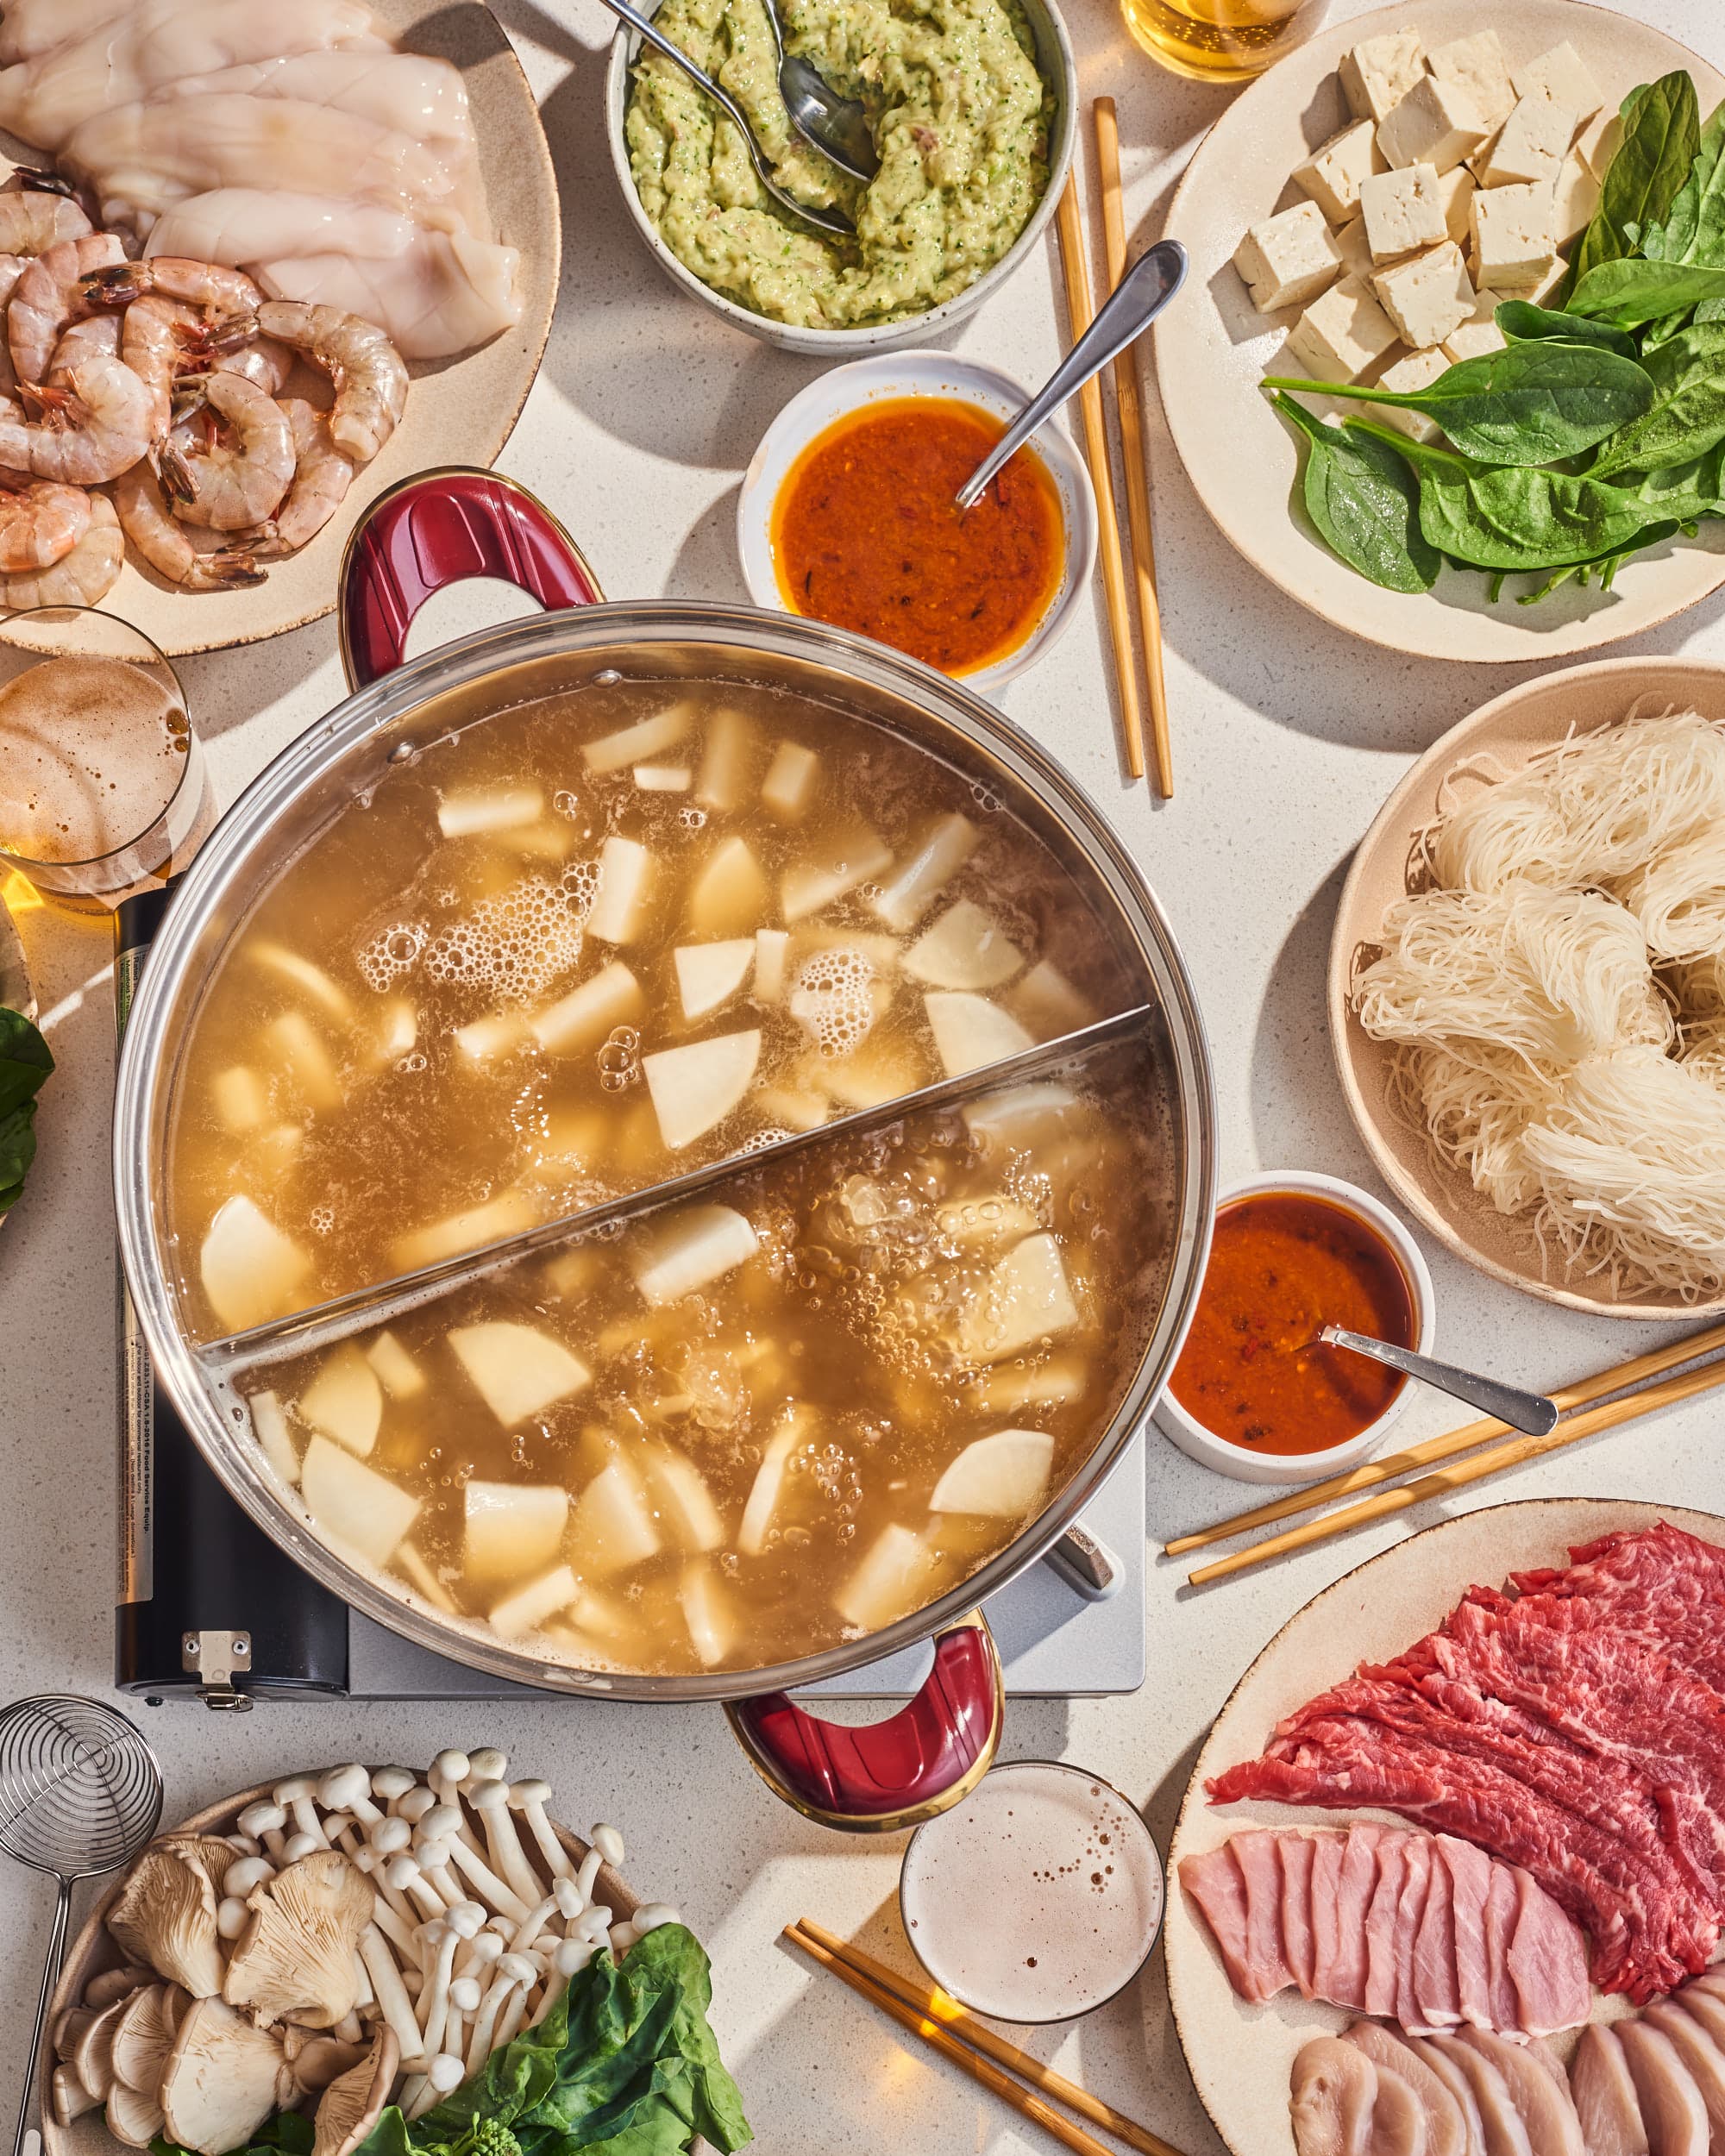 Chinese Hot Pot at Home: How To! - The Woks of Life